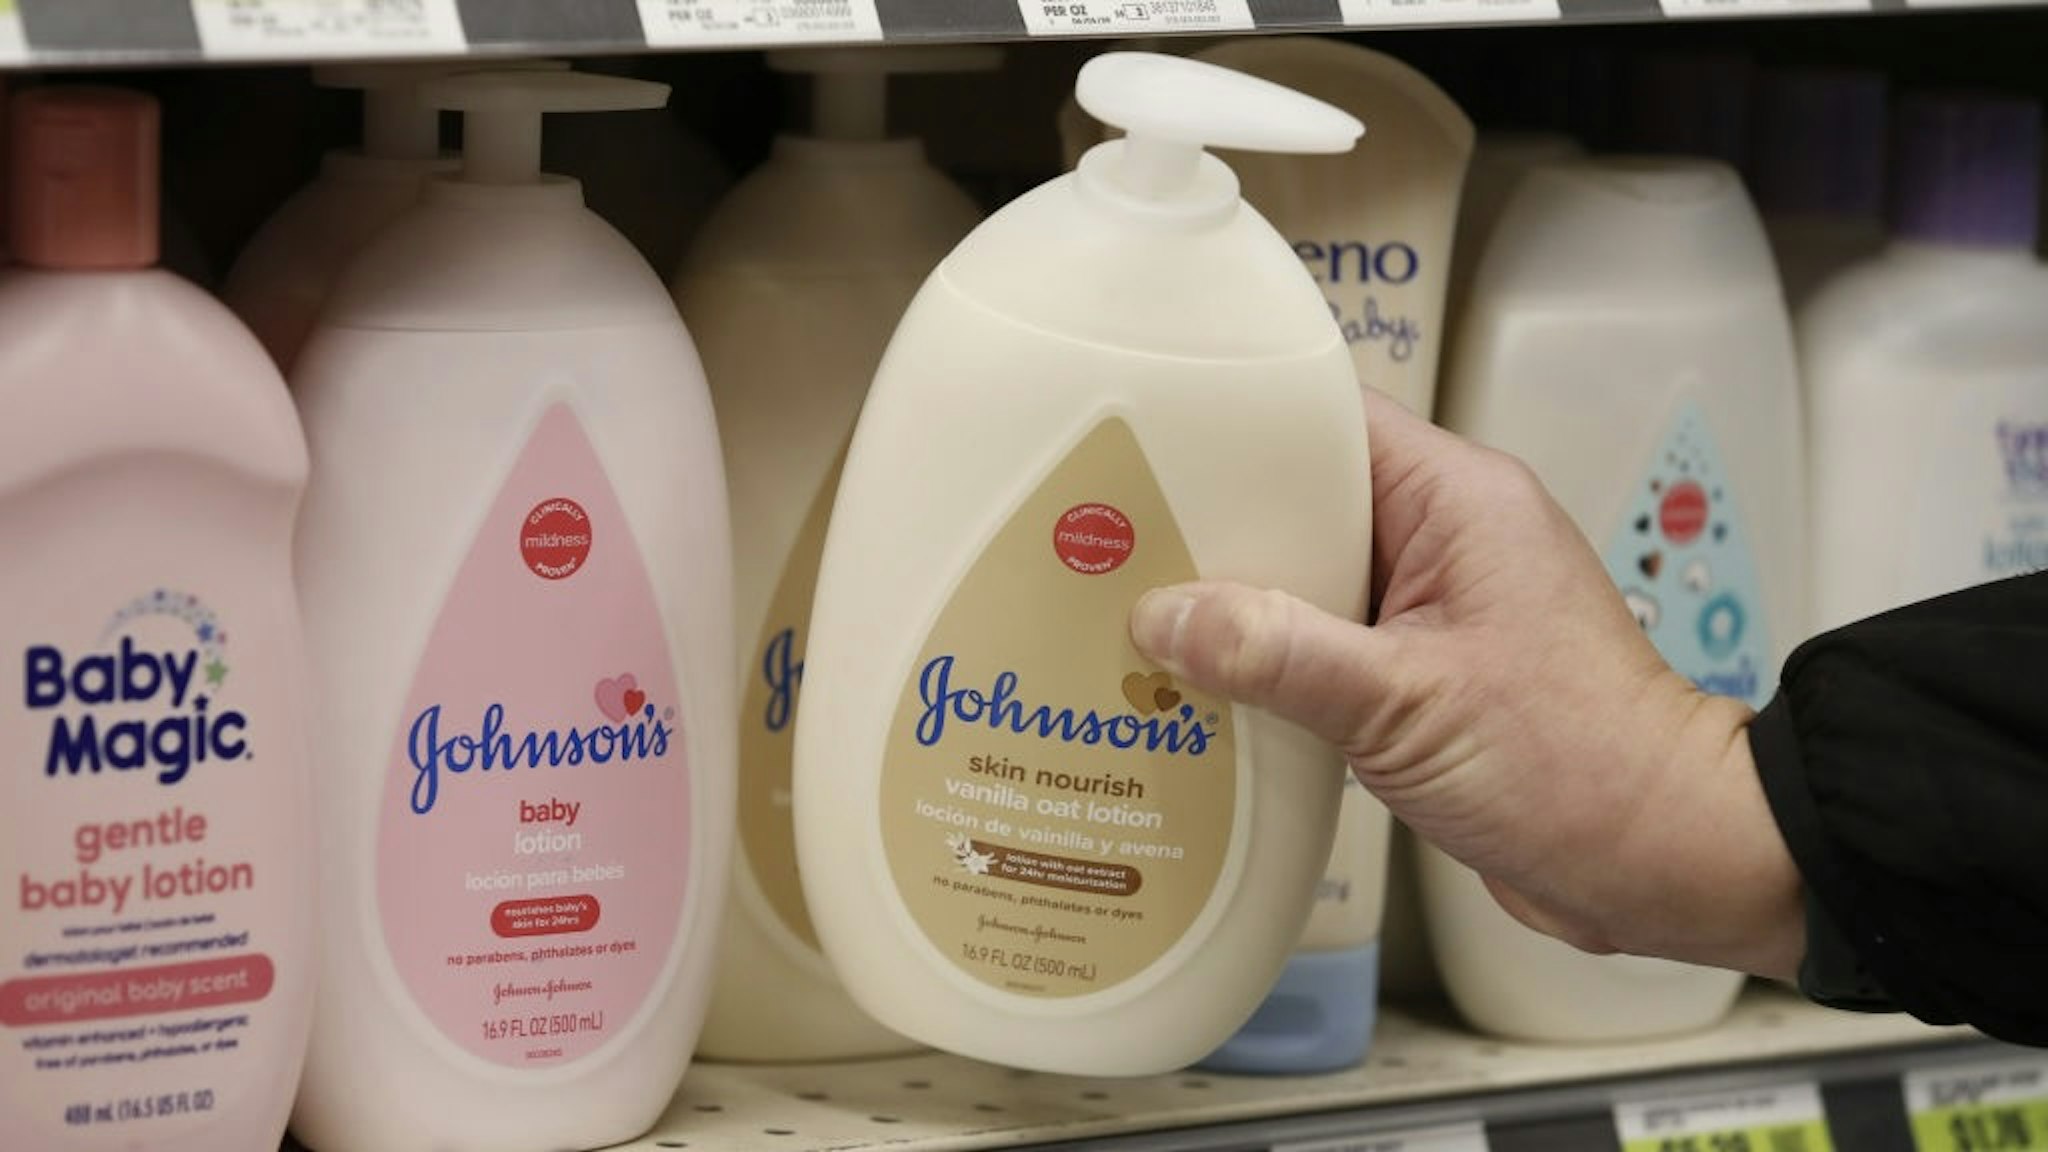 Johnson & Johnson Products As Company's Covid Vaccine Found Effective By FDA A bottle of Johnson & Johnson's brand lotion for sale at a pharmacy in Salt Lake City, Utah, U.S., on Thursday, Feb. 25, 2021. Johnson & Johnsons Covid-19 vaccine is safe and effective, U.S. regulators said, a key milestone on the path toward giving Americans access to the first such shot to work in a single dose. Photographer: George Frey/Bloomberg via Getty Images Bloomberg / Contributor